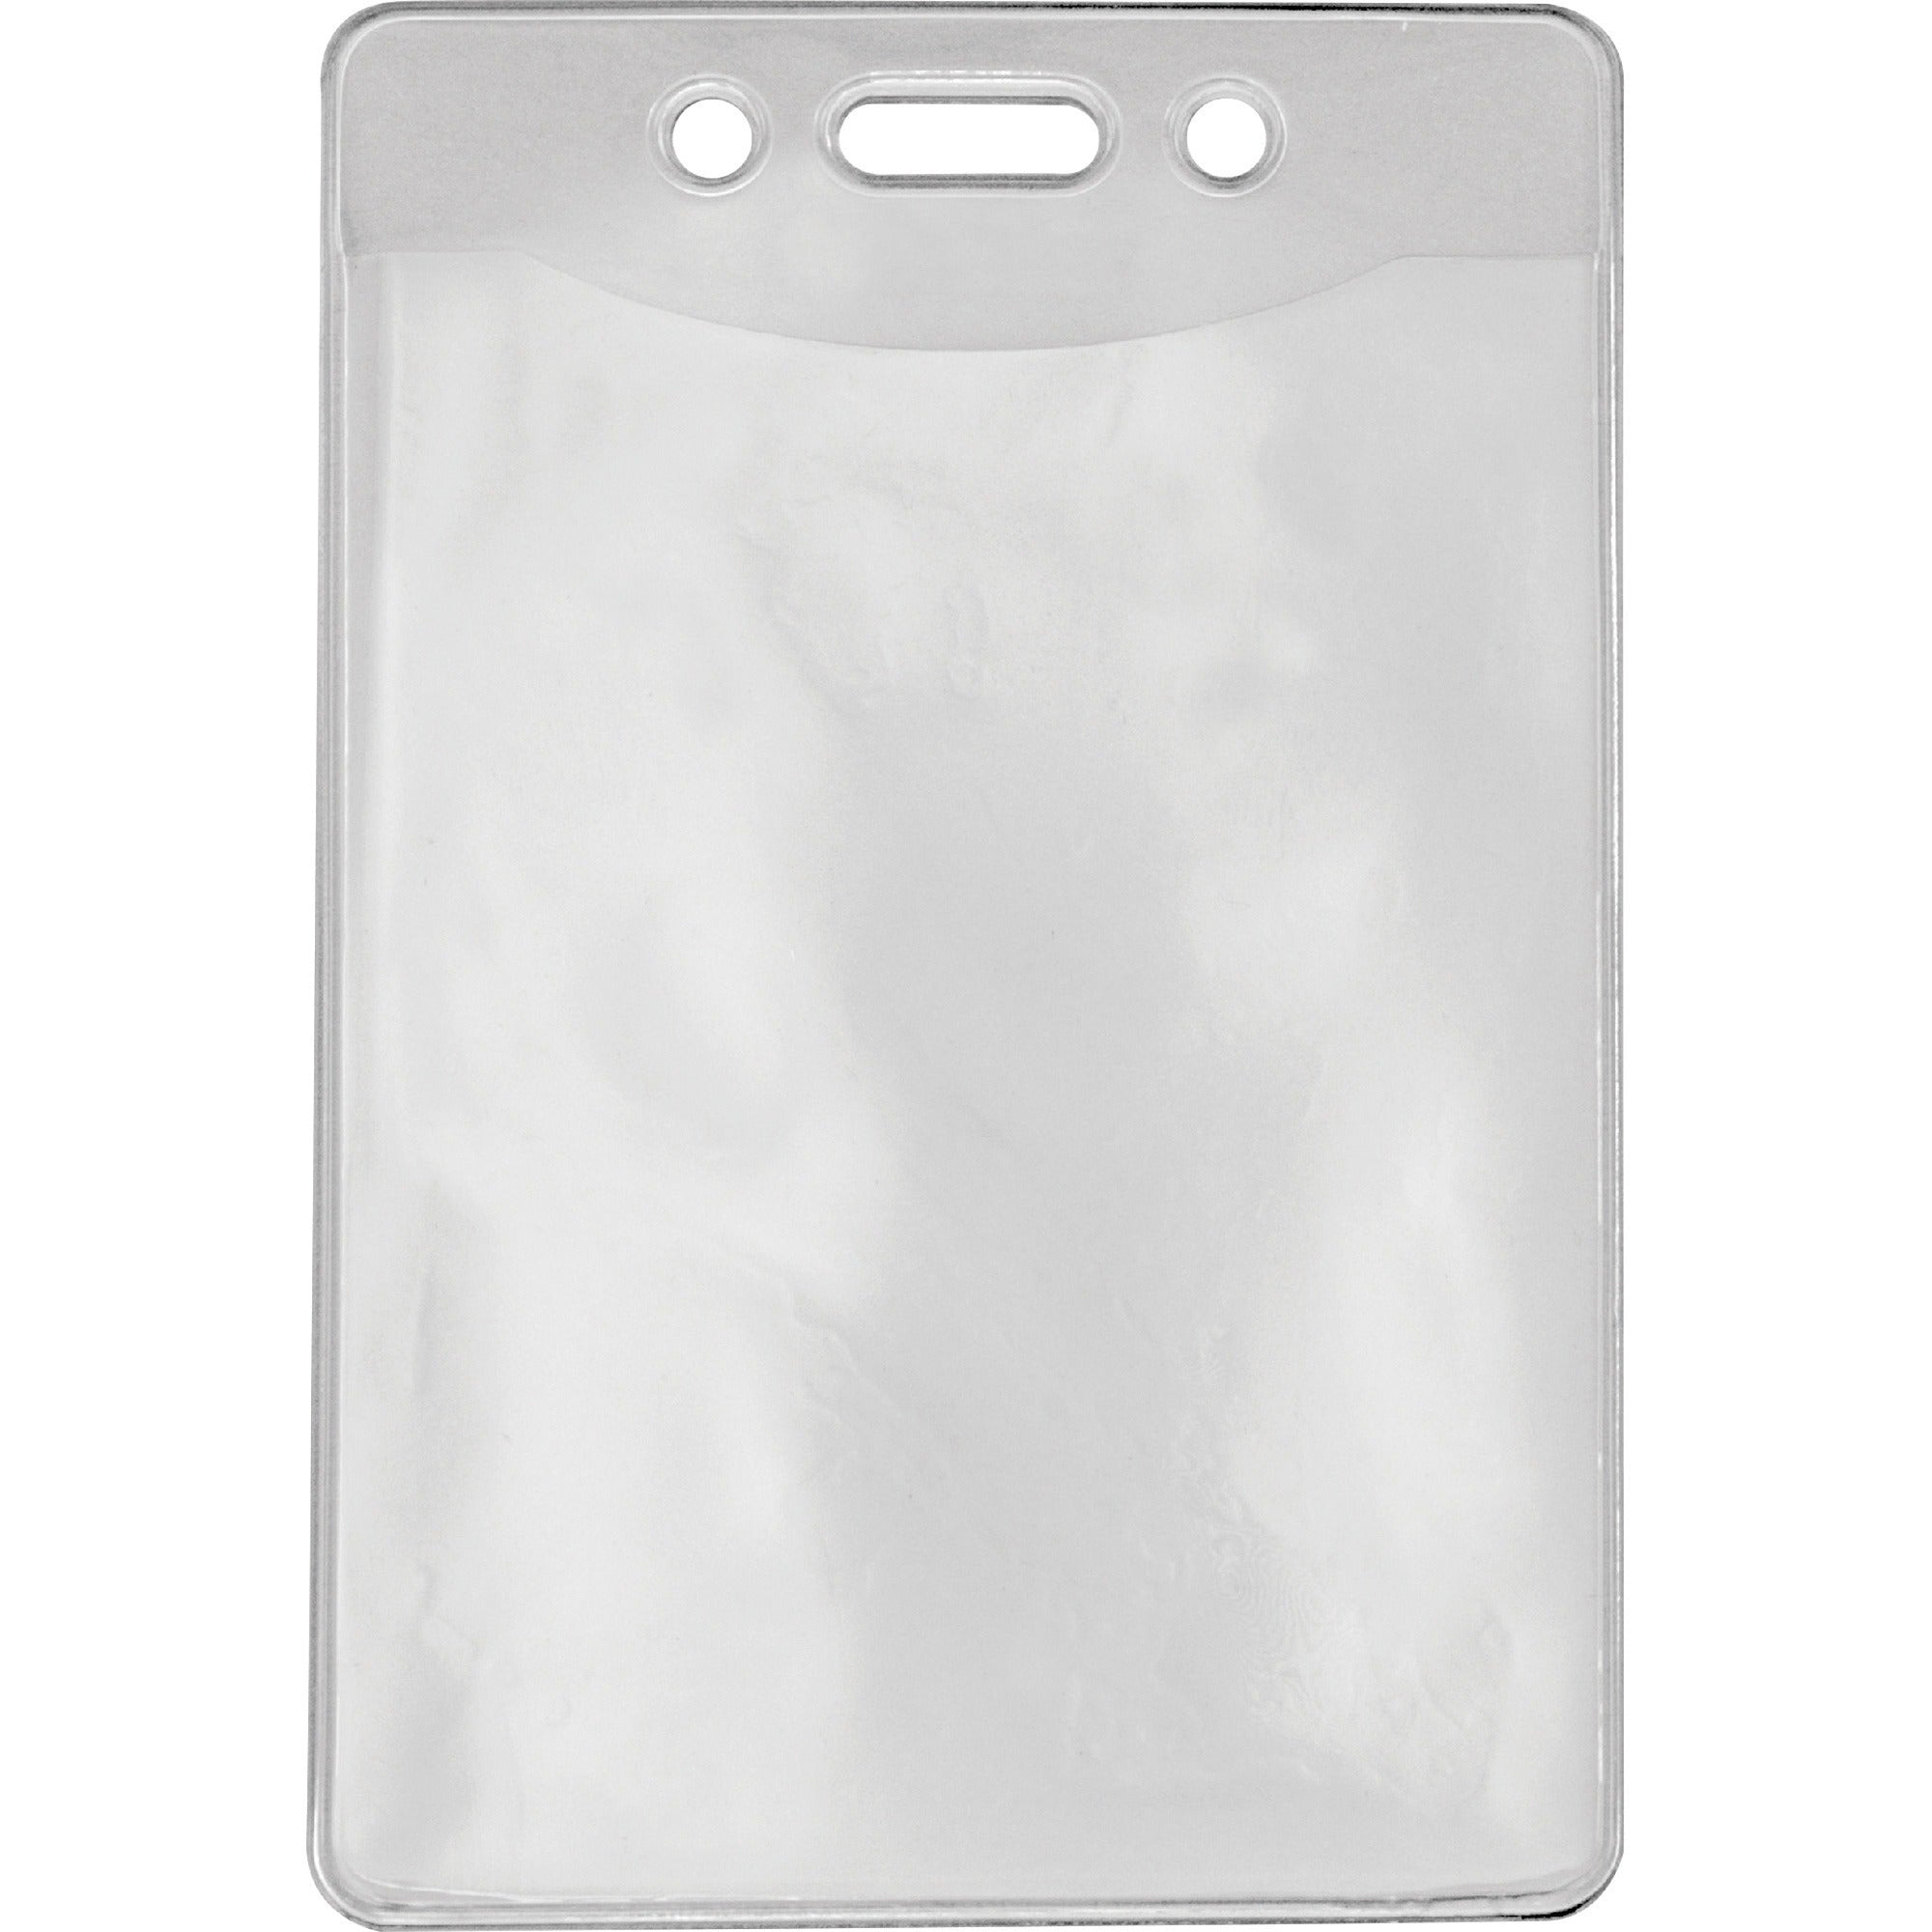 advantus-government-military-id-holders-support-288-x-388-media-vertical-vinyl-50-pack-clear-durable_avt97097 - 1